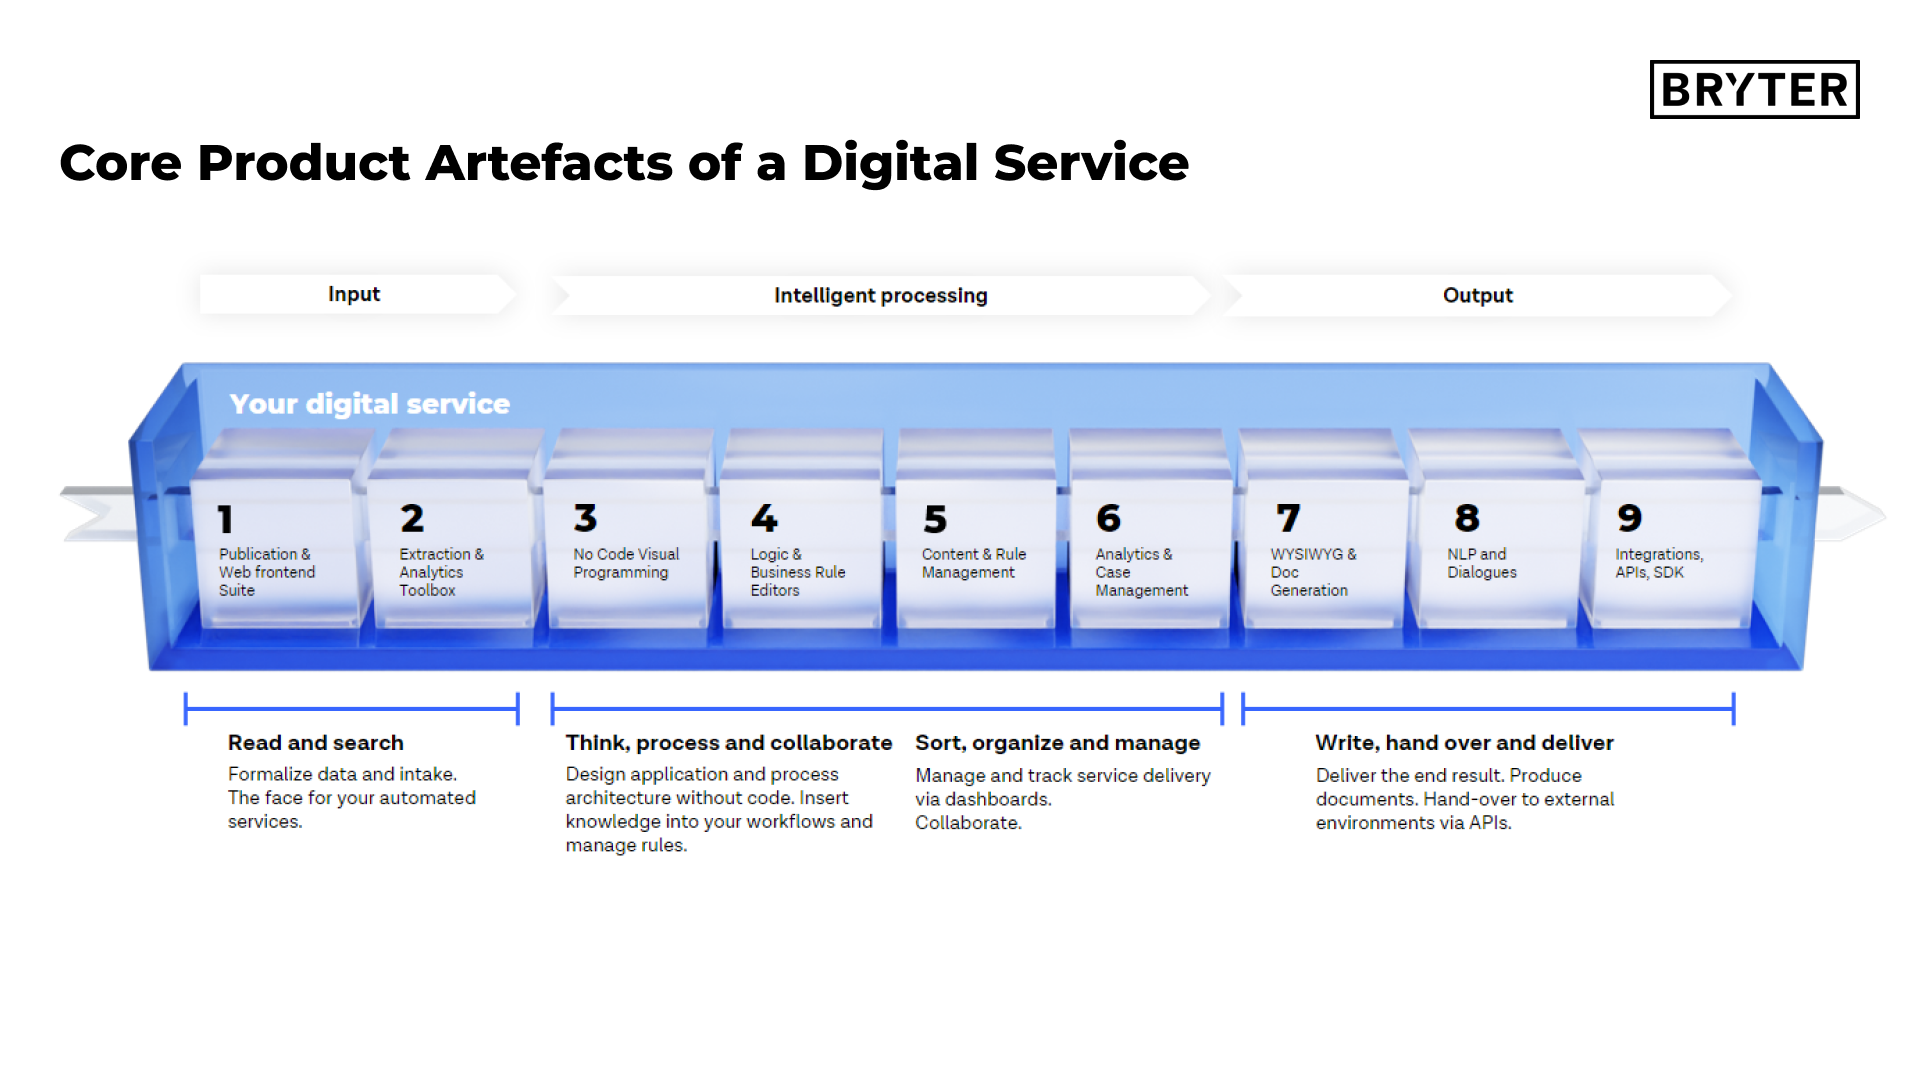 Core Product Artefacts of a Digital Service